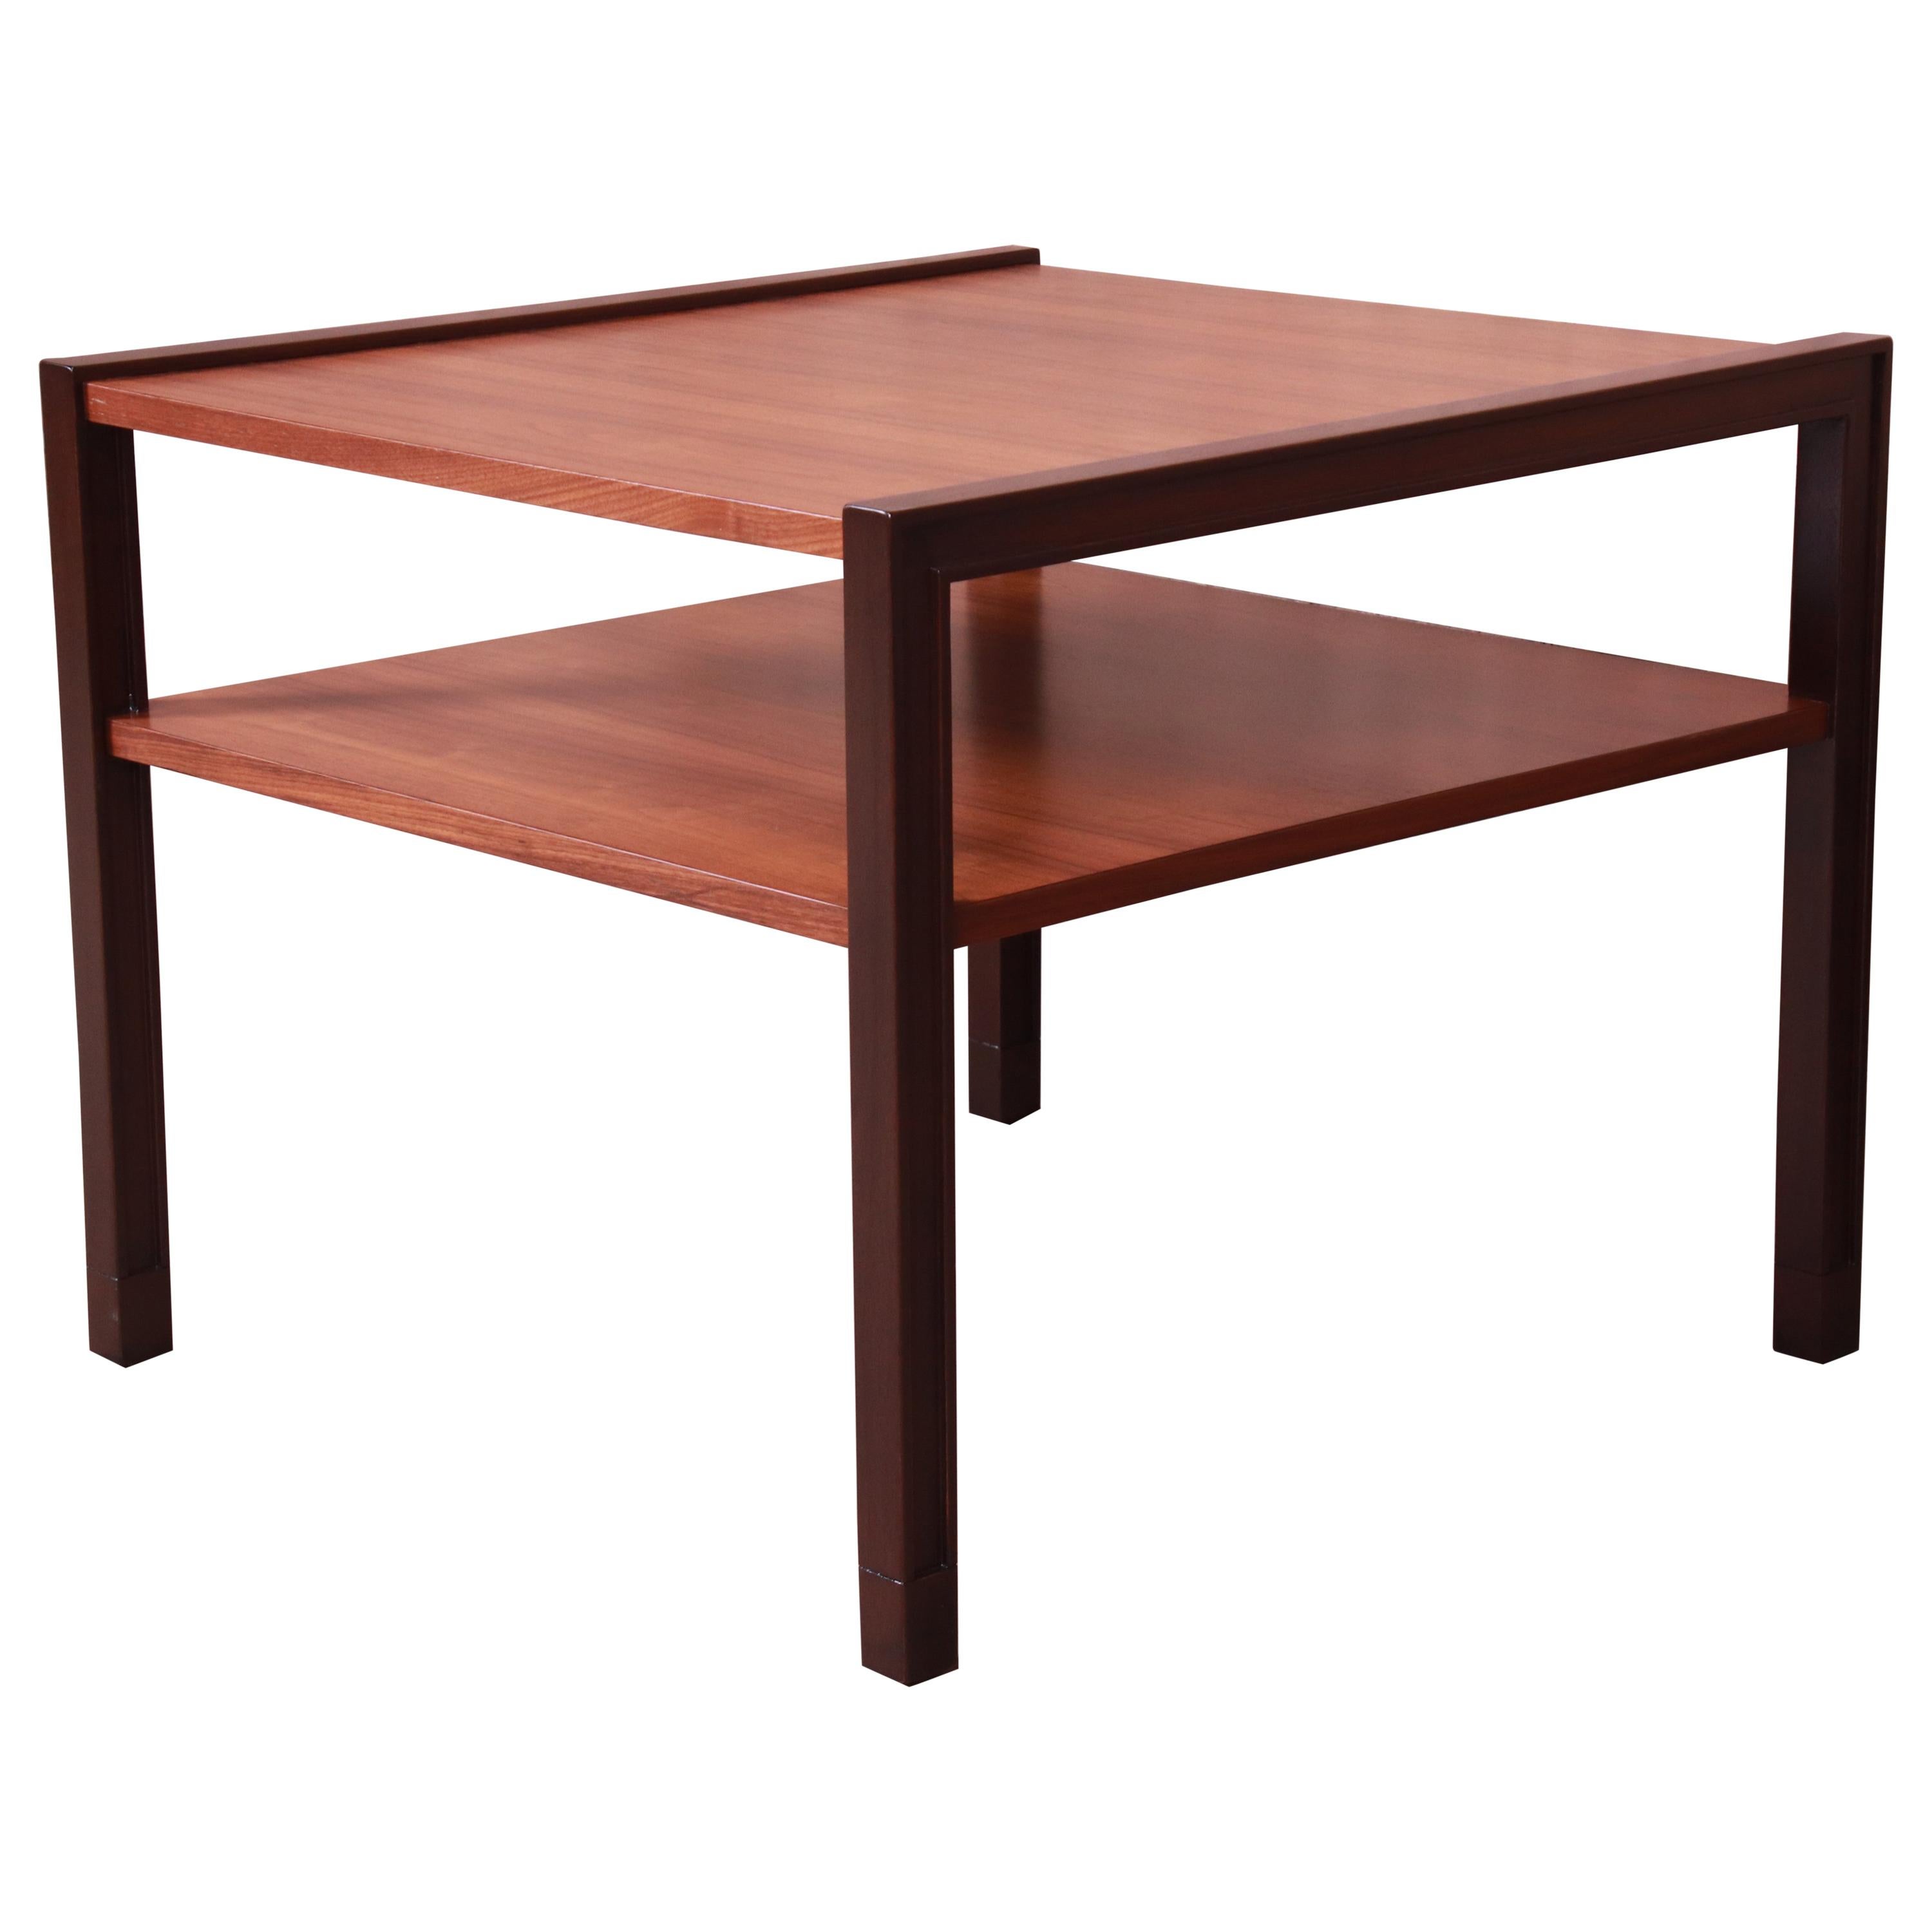 Edward Wormley for Dunbar Walnut and Mahogany Two-Tier Side Table, Restored